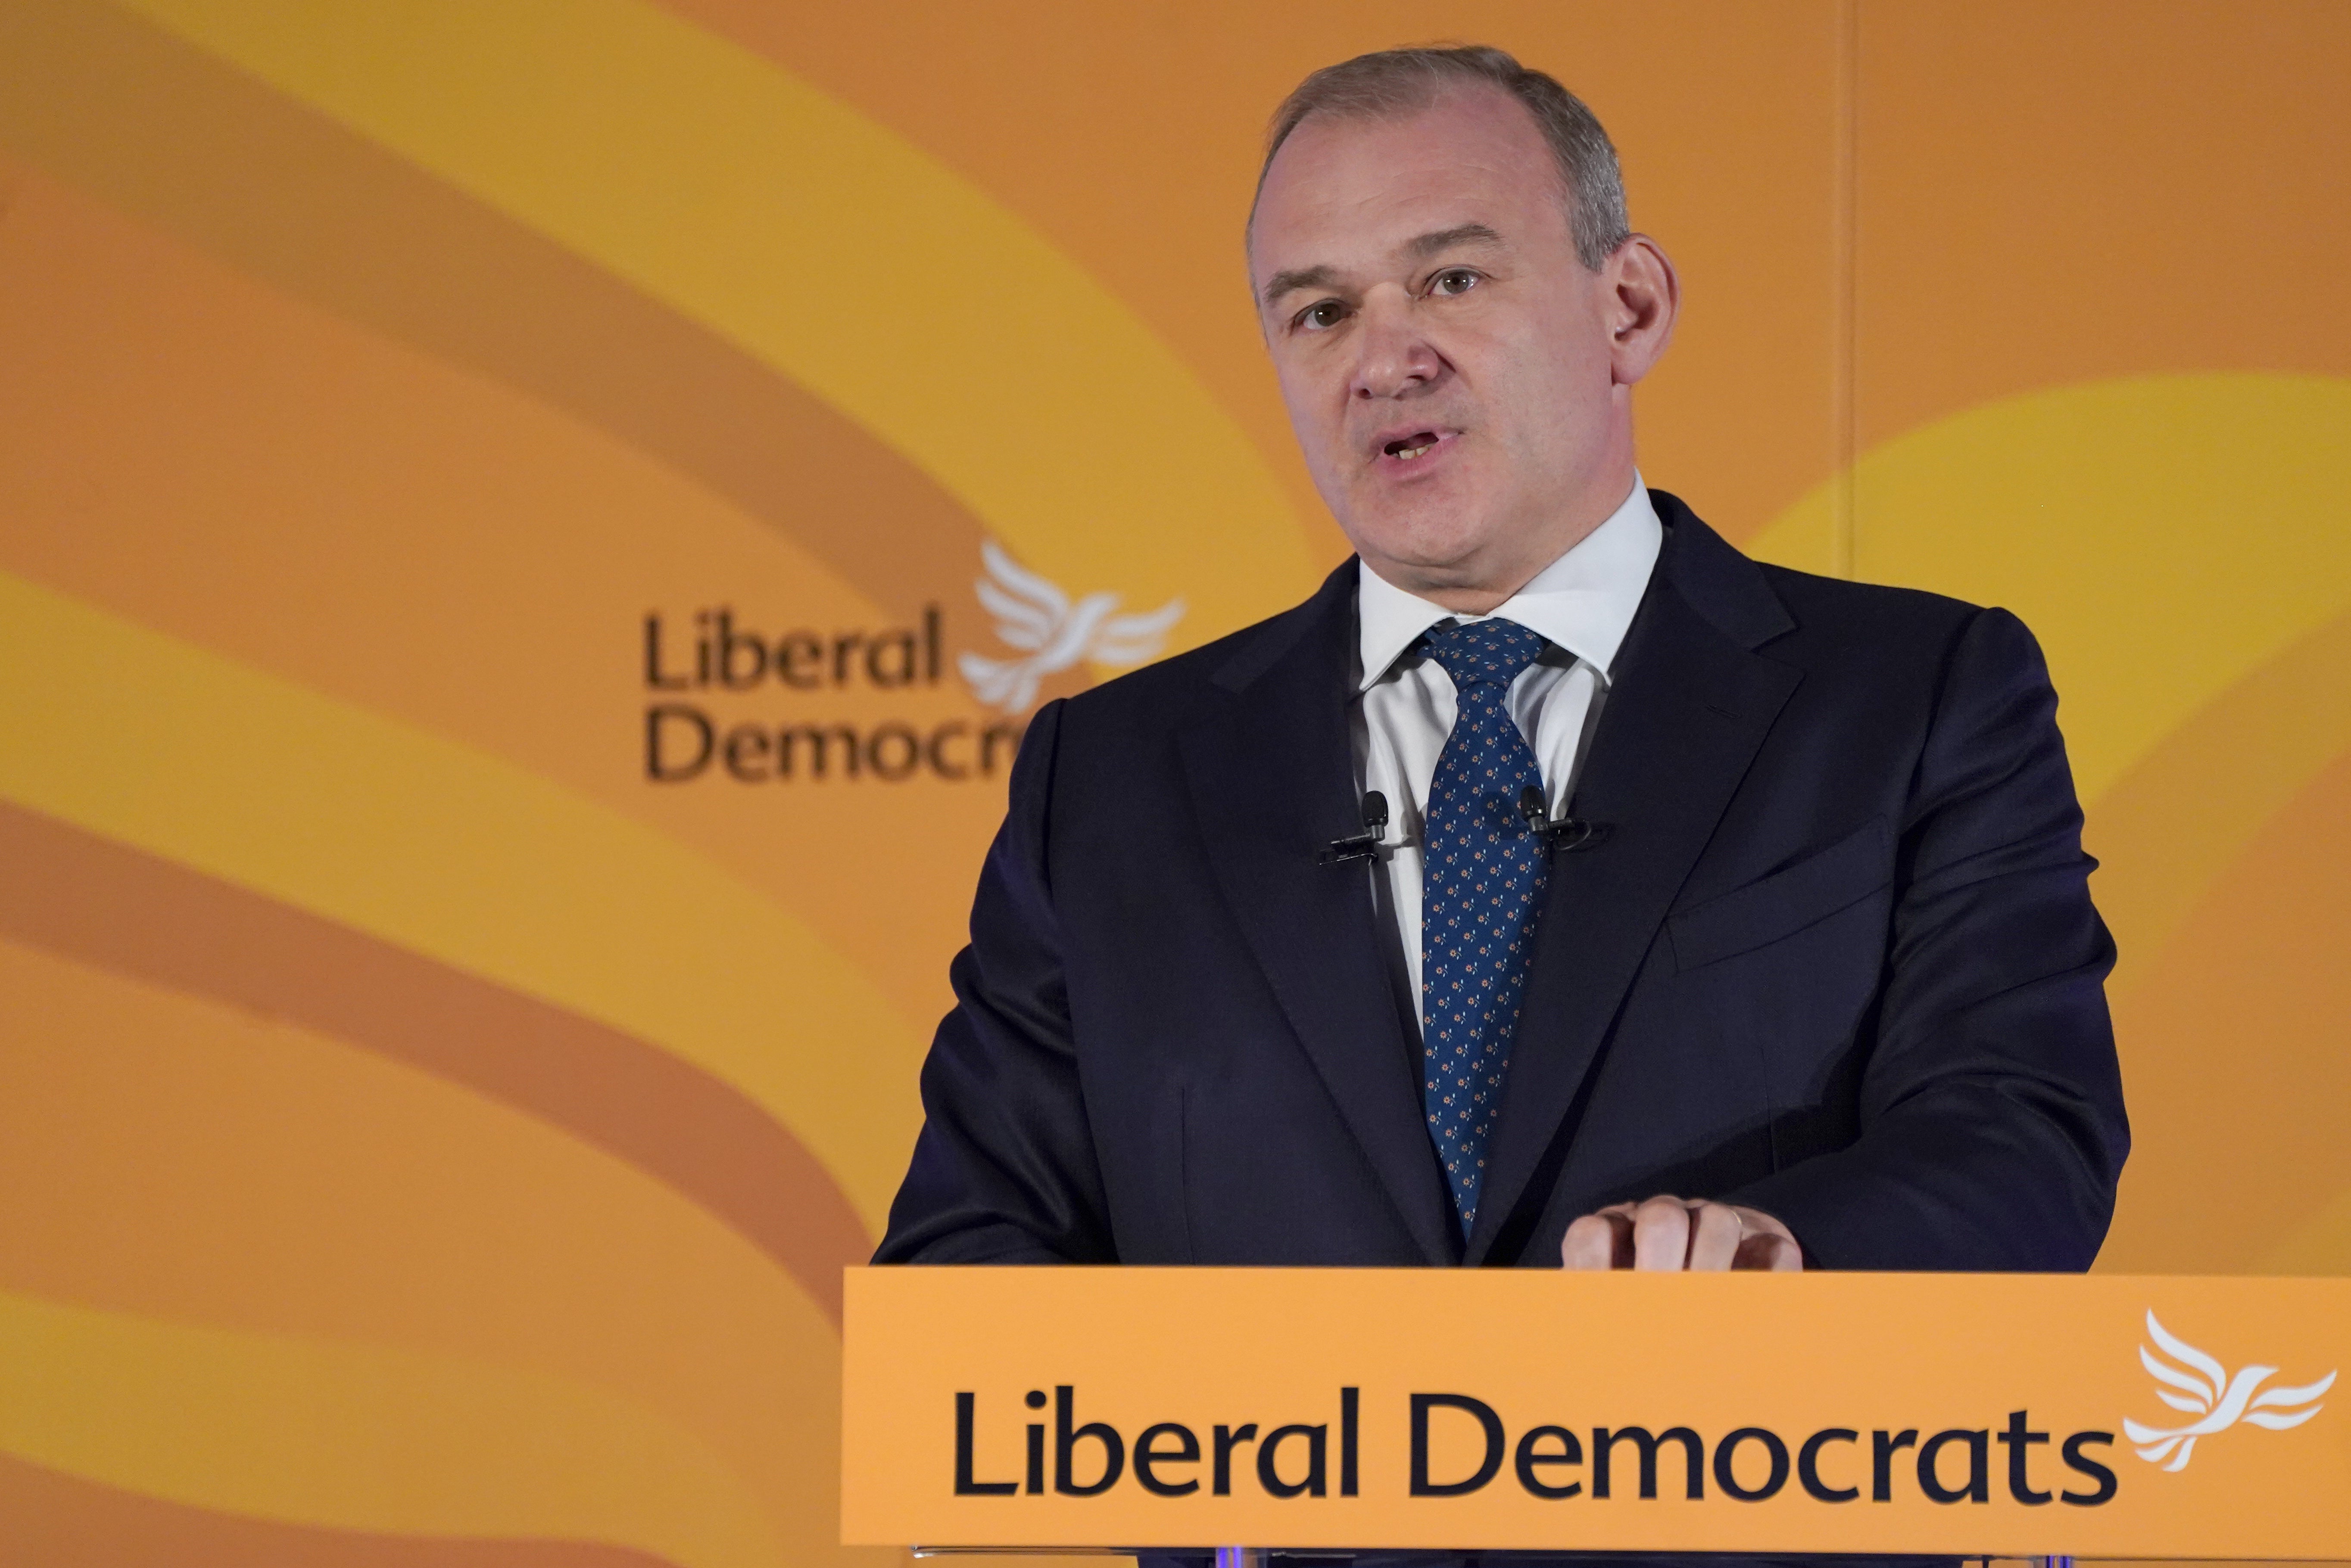 Lib Dem leader Sir Ed Davey has proposed recruiting more GPs and giving pharmacists more powers to reduce pressure on struggling A&E departments